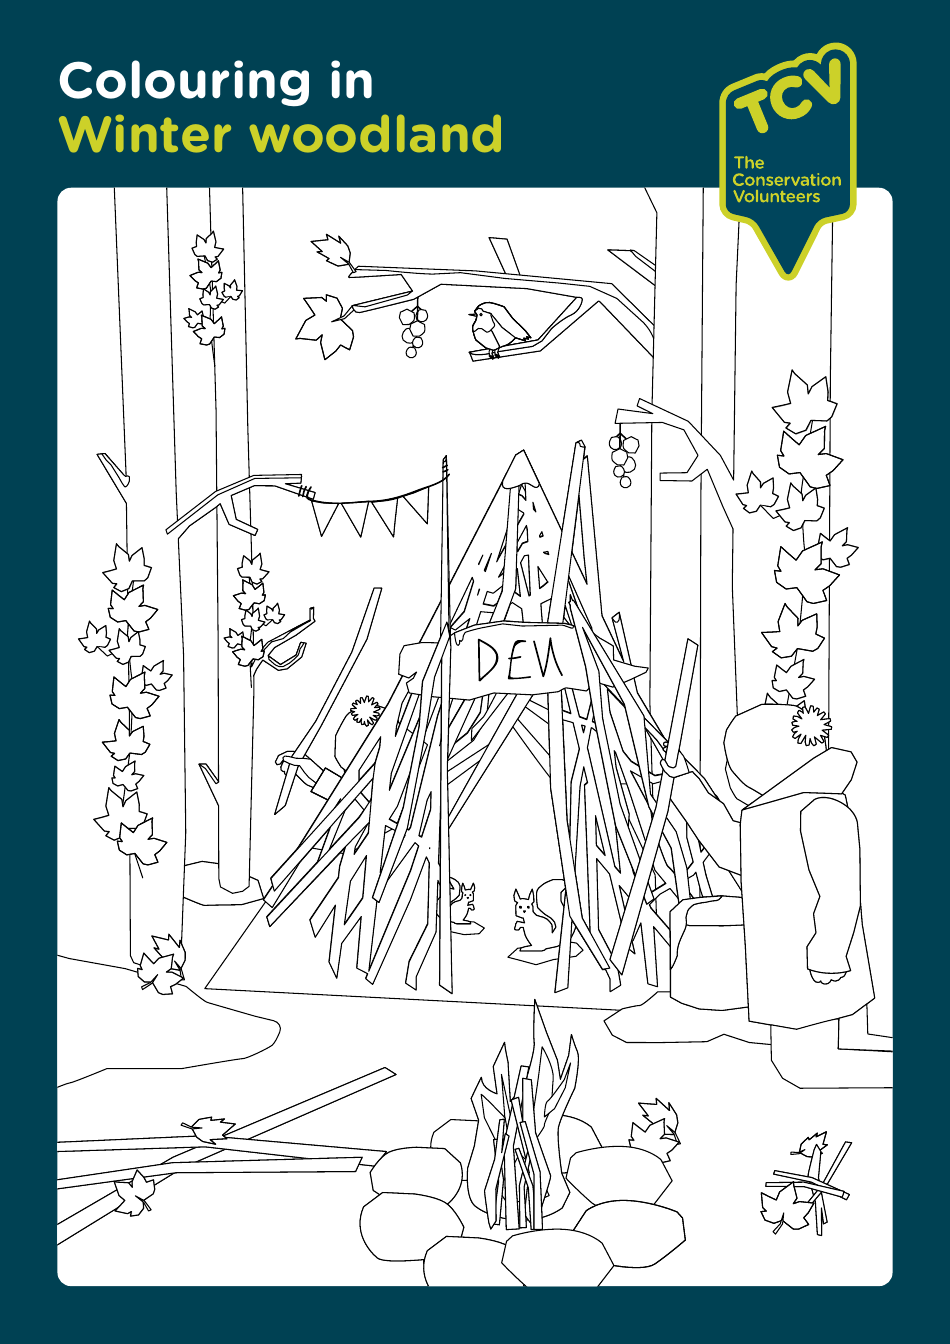 Winter Woodland coloring page - Stock illustration